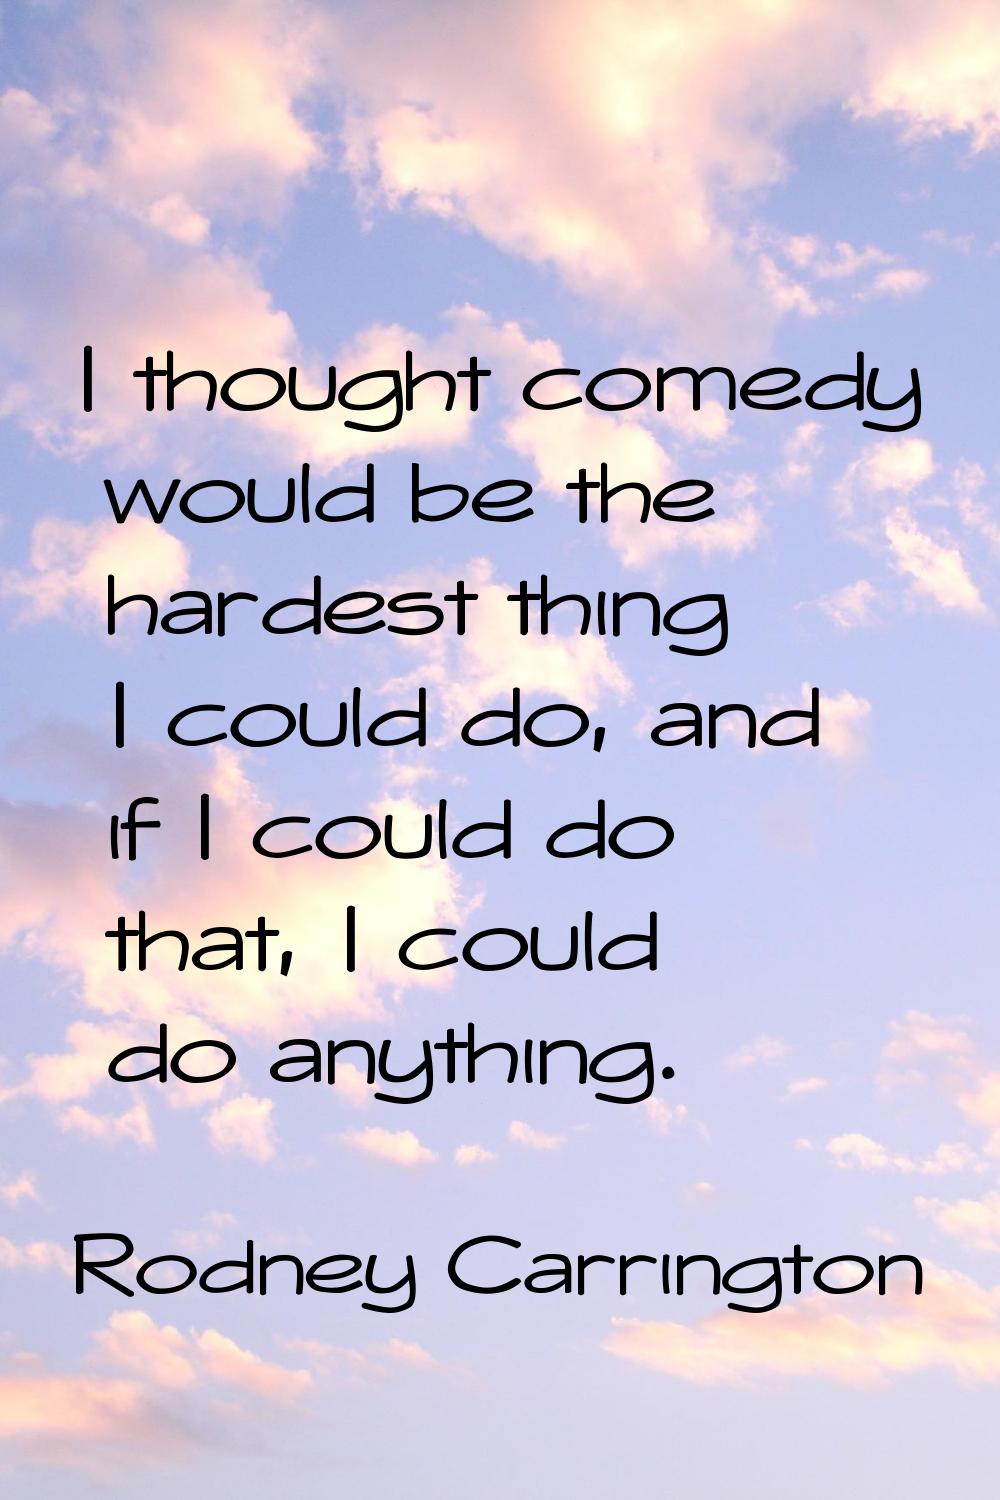 I thought comedy would be the hardest thing I could do, and if I could do that, I could do anything